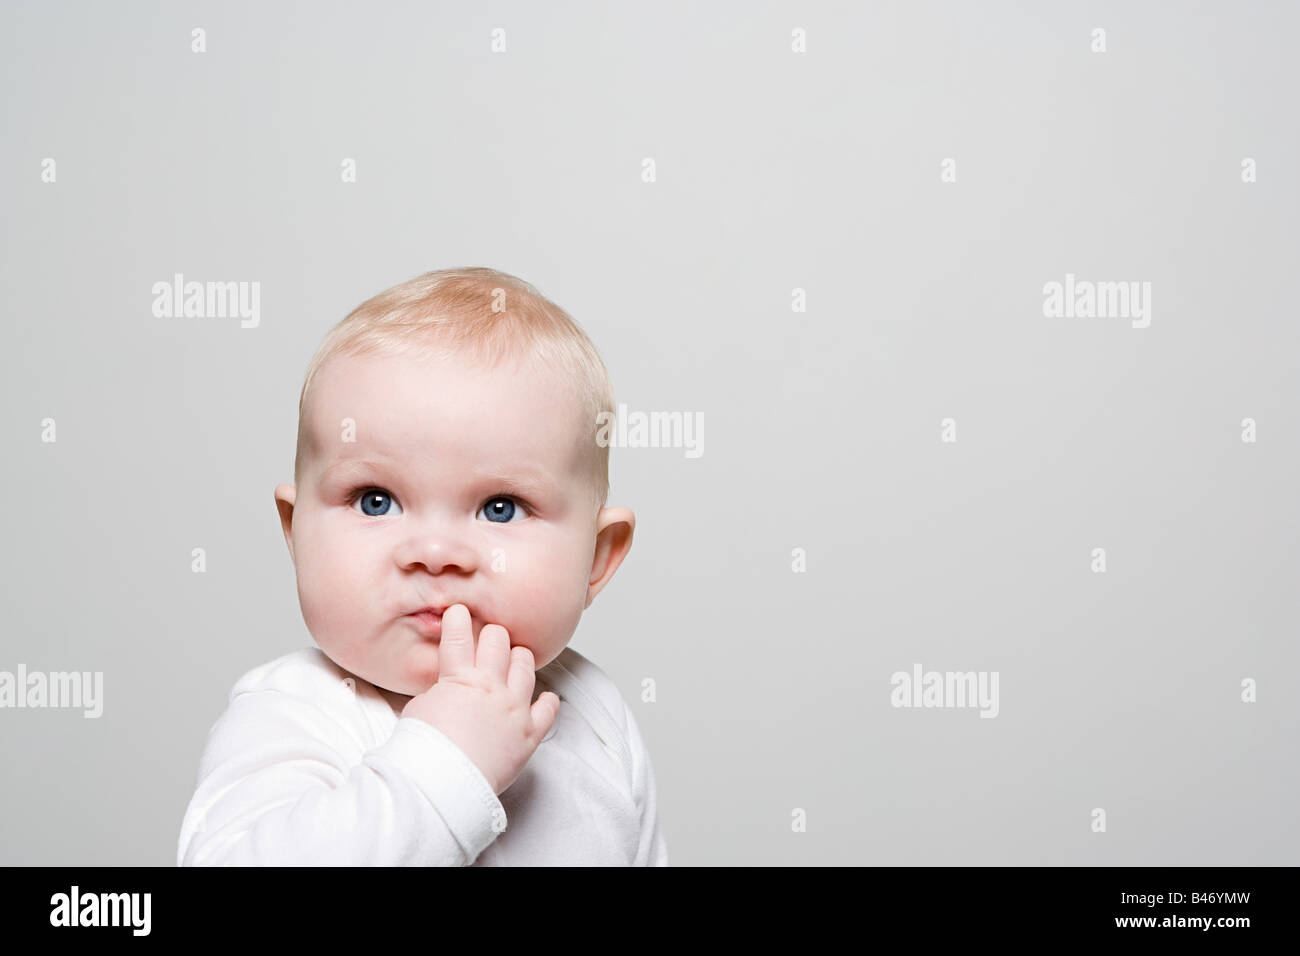 Portait of a baby Stock Photo